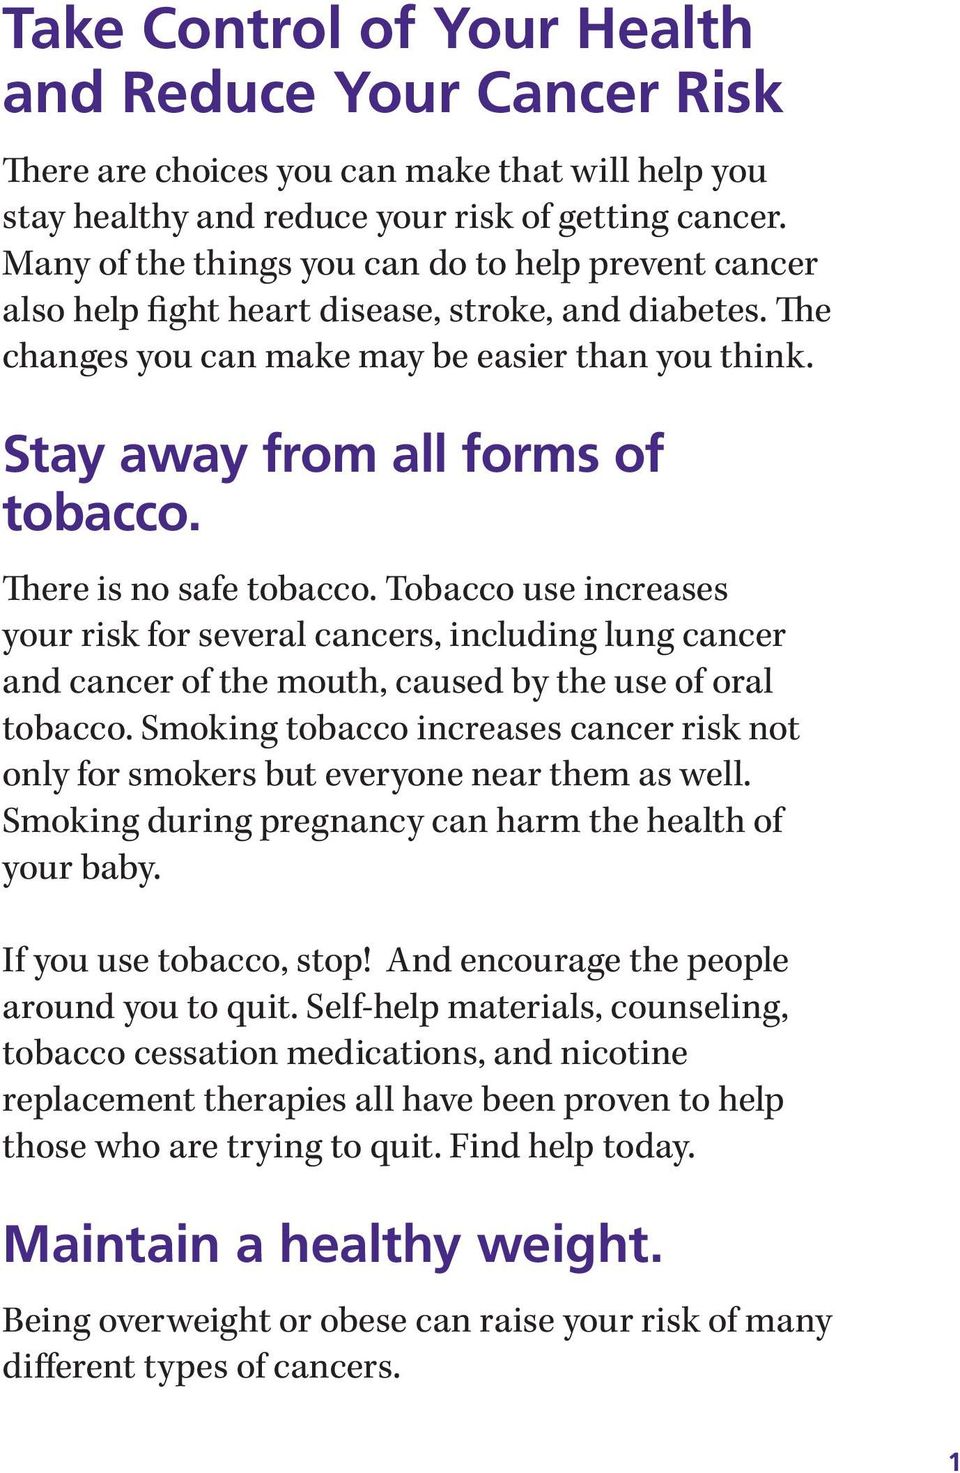 There is no safe tobacco. Tobacco use increases your risk for several cancers, including lung cancer and cancer of the mouth, caused by the use of oral tobacco.